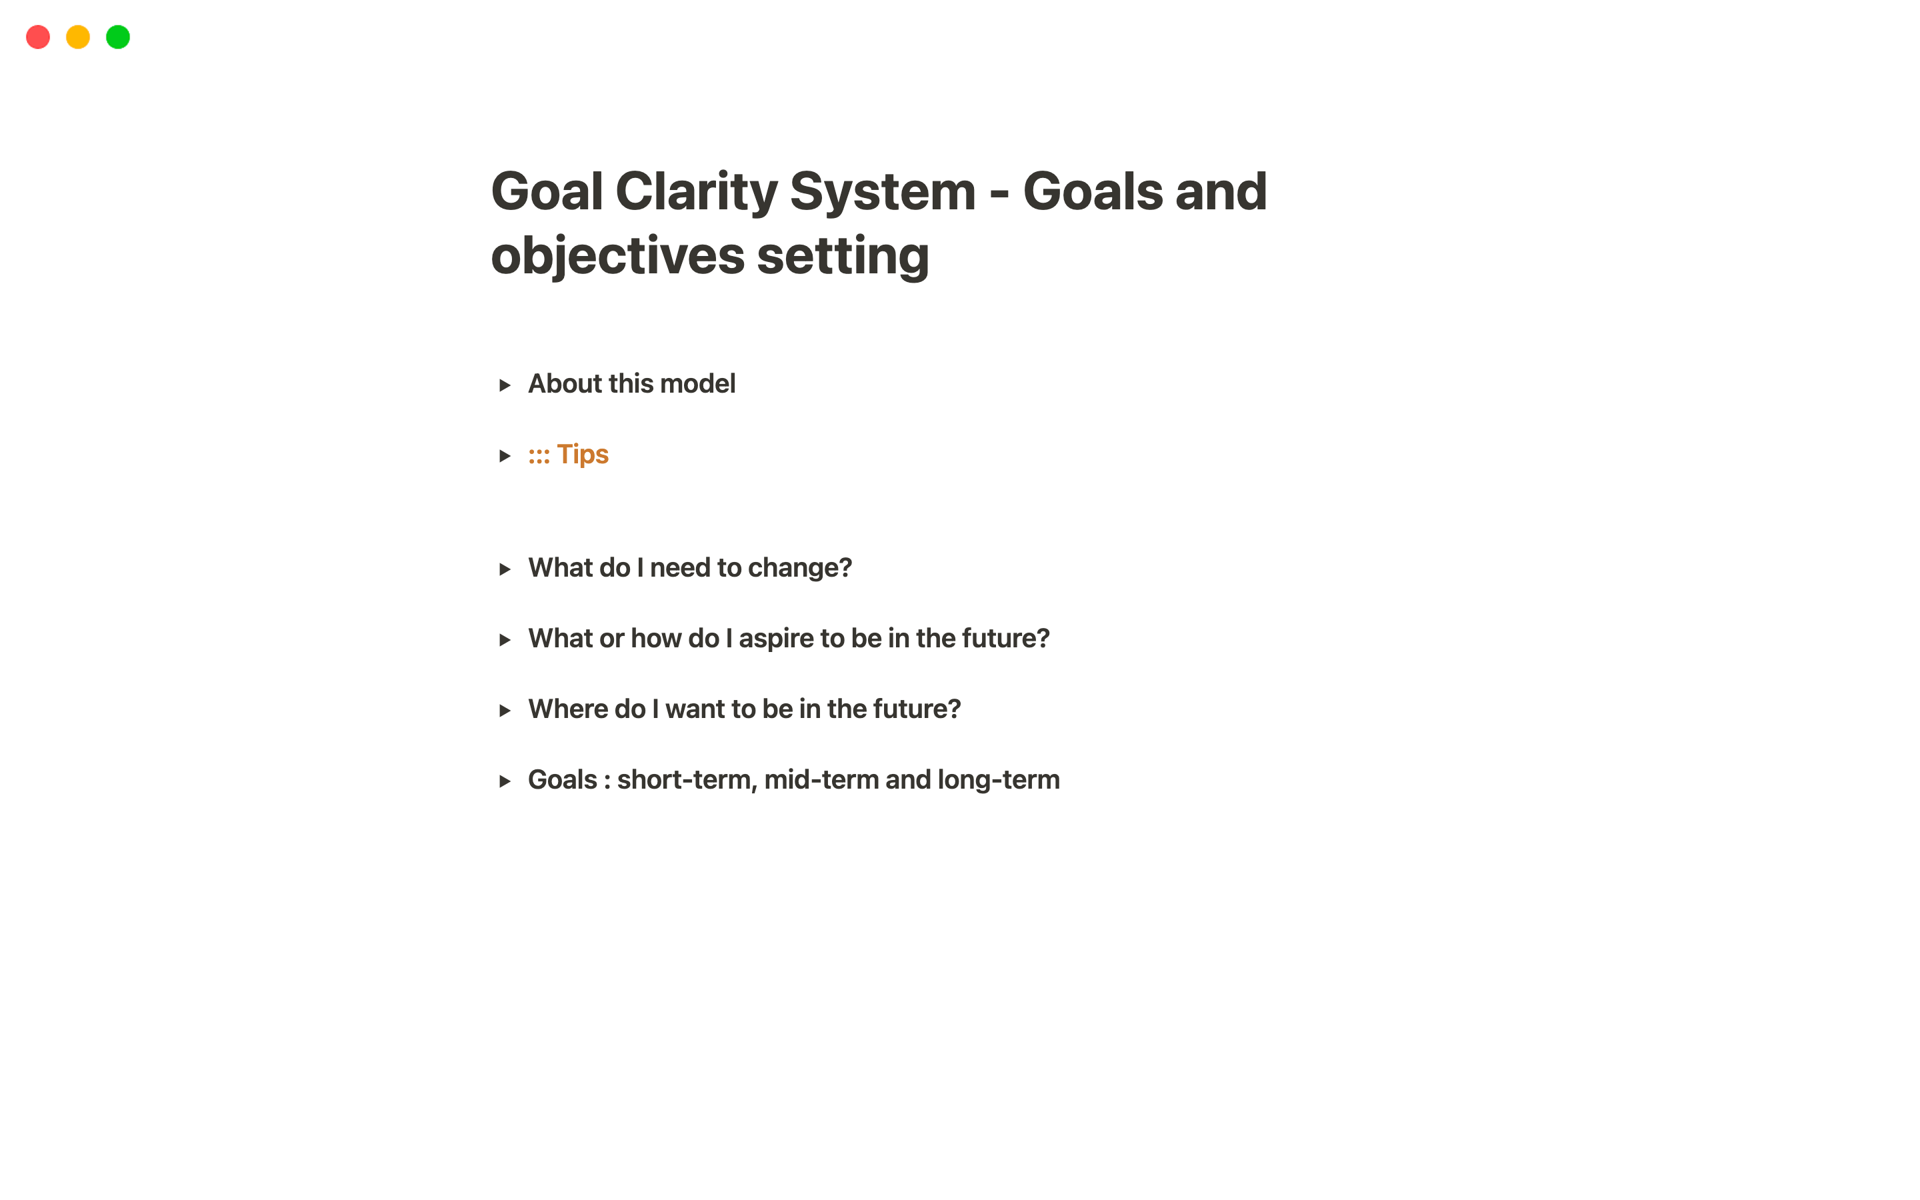 This model offers a systematic approach to defining and achieving personal and professional goals, emphasizing clarity, specificity, and mitigating obstacles to enhance motivation and mental well-being.